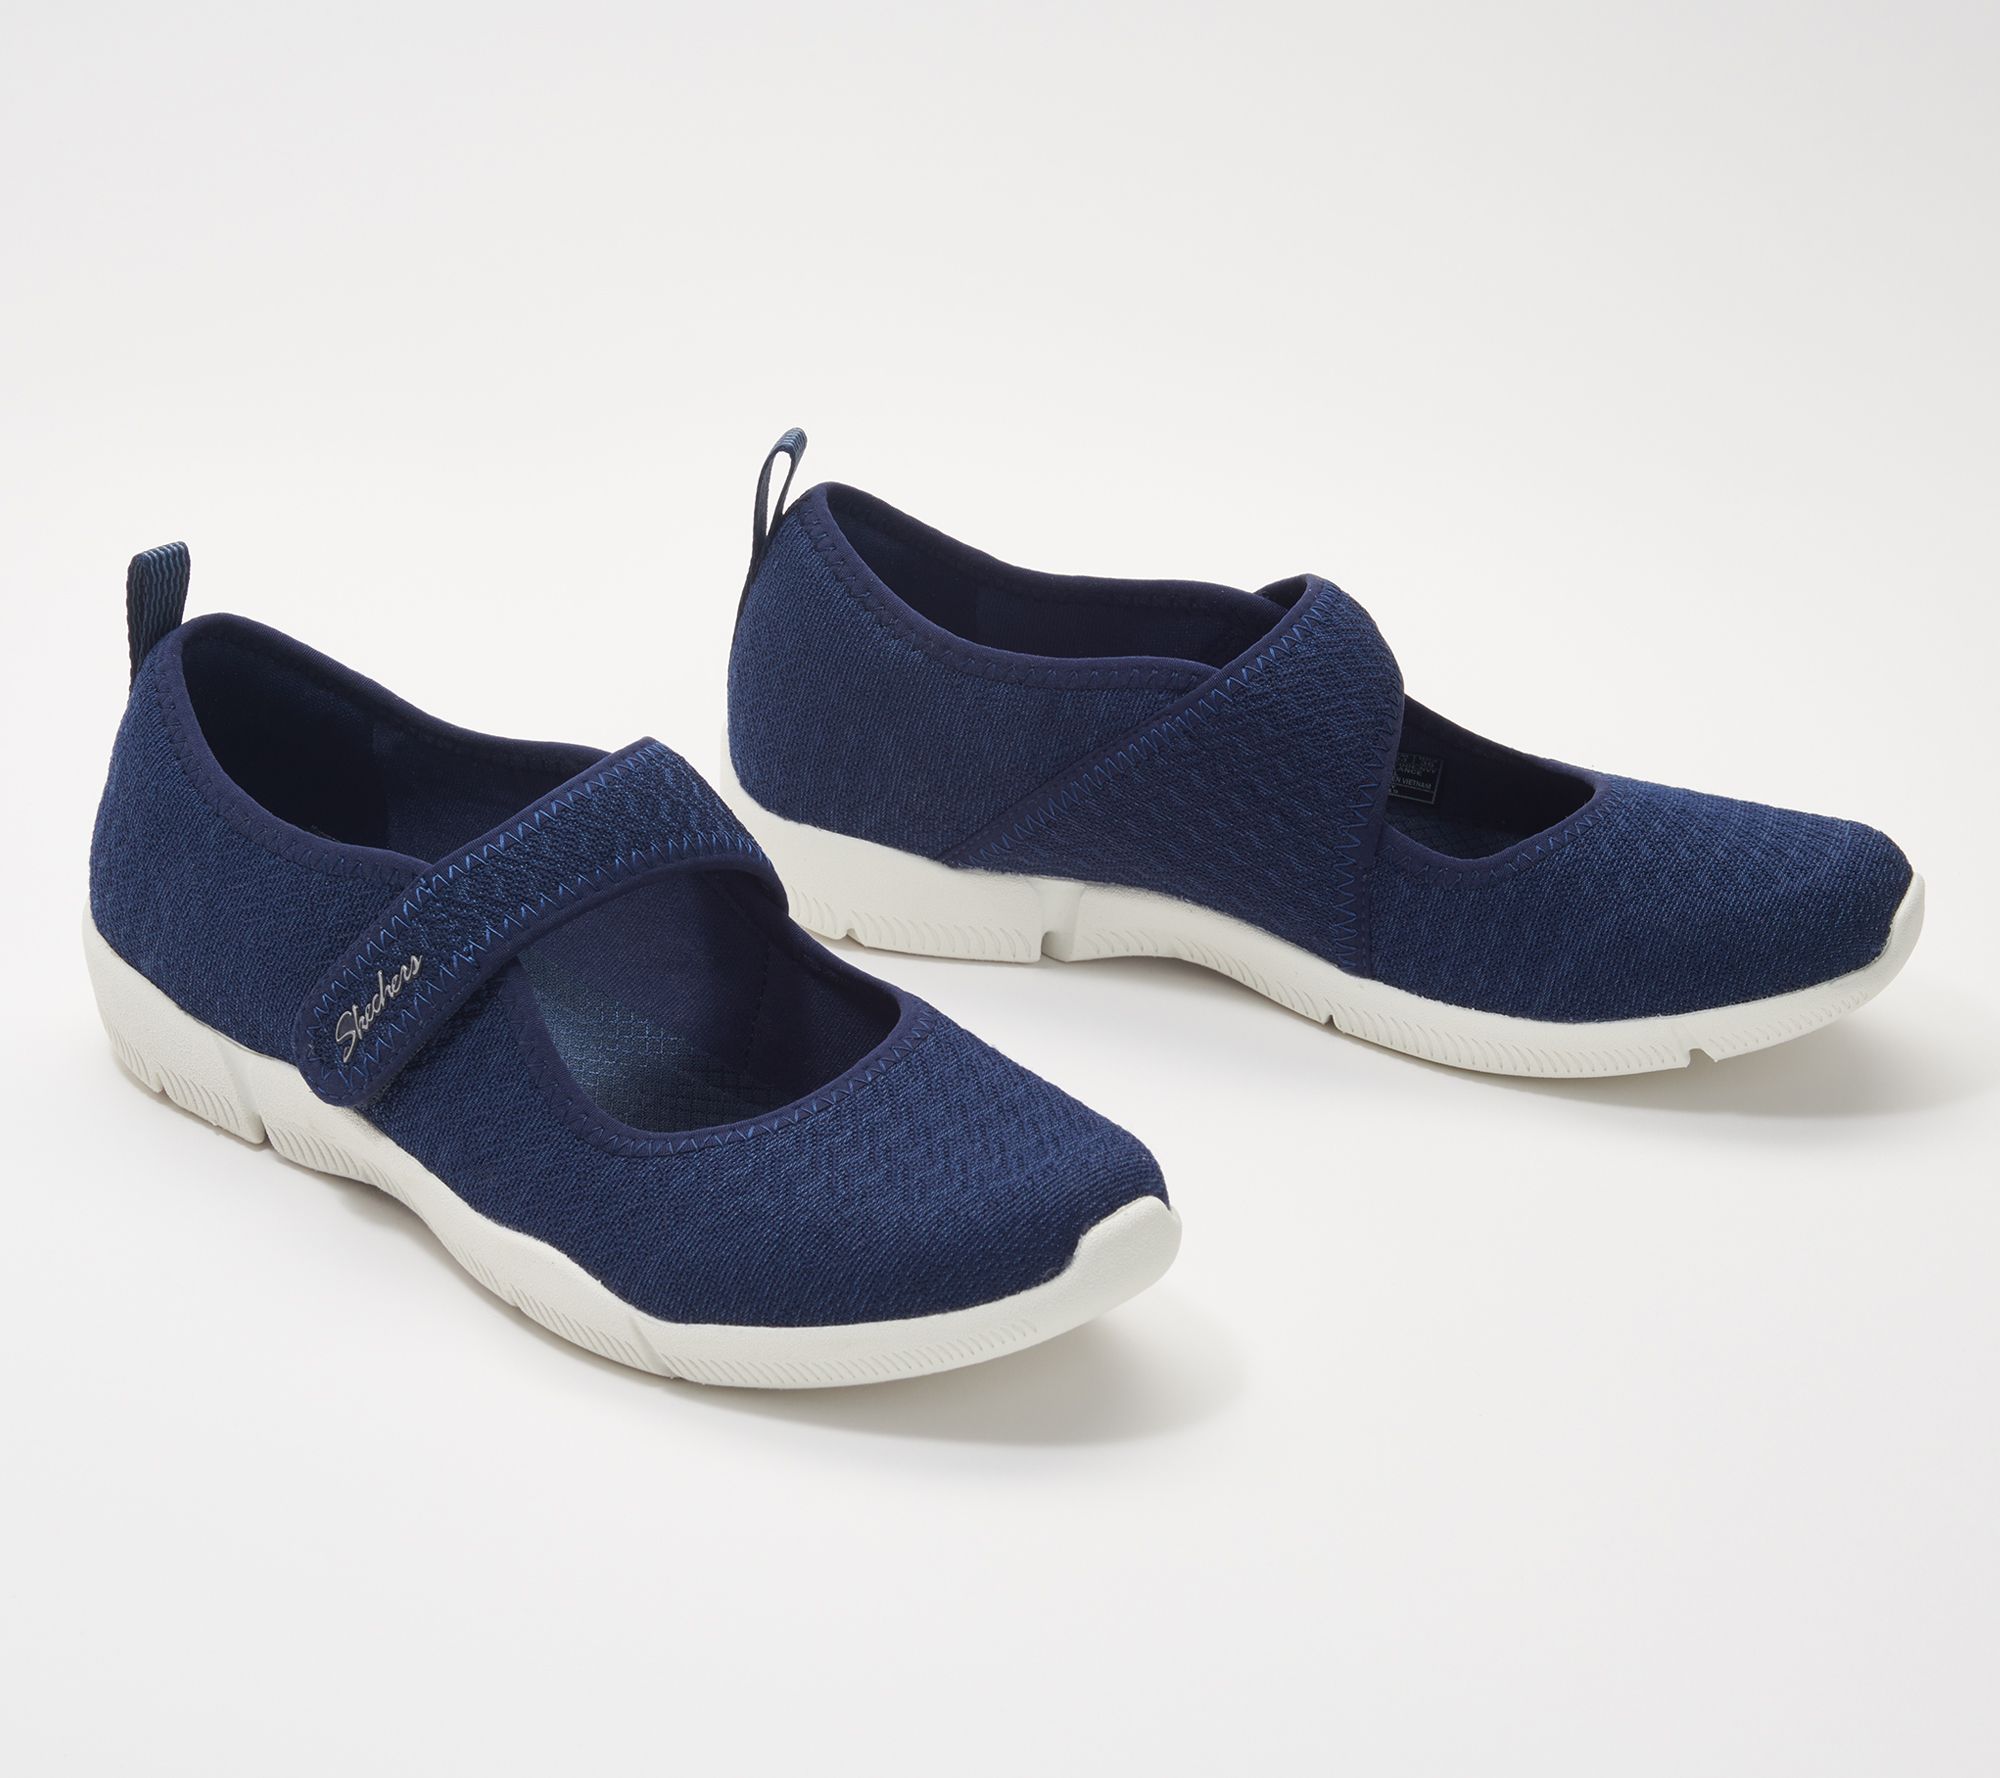 Skechers Soft Knit Mary Janes- Be Lux 